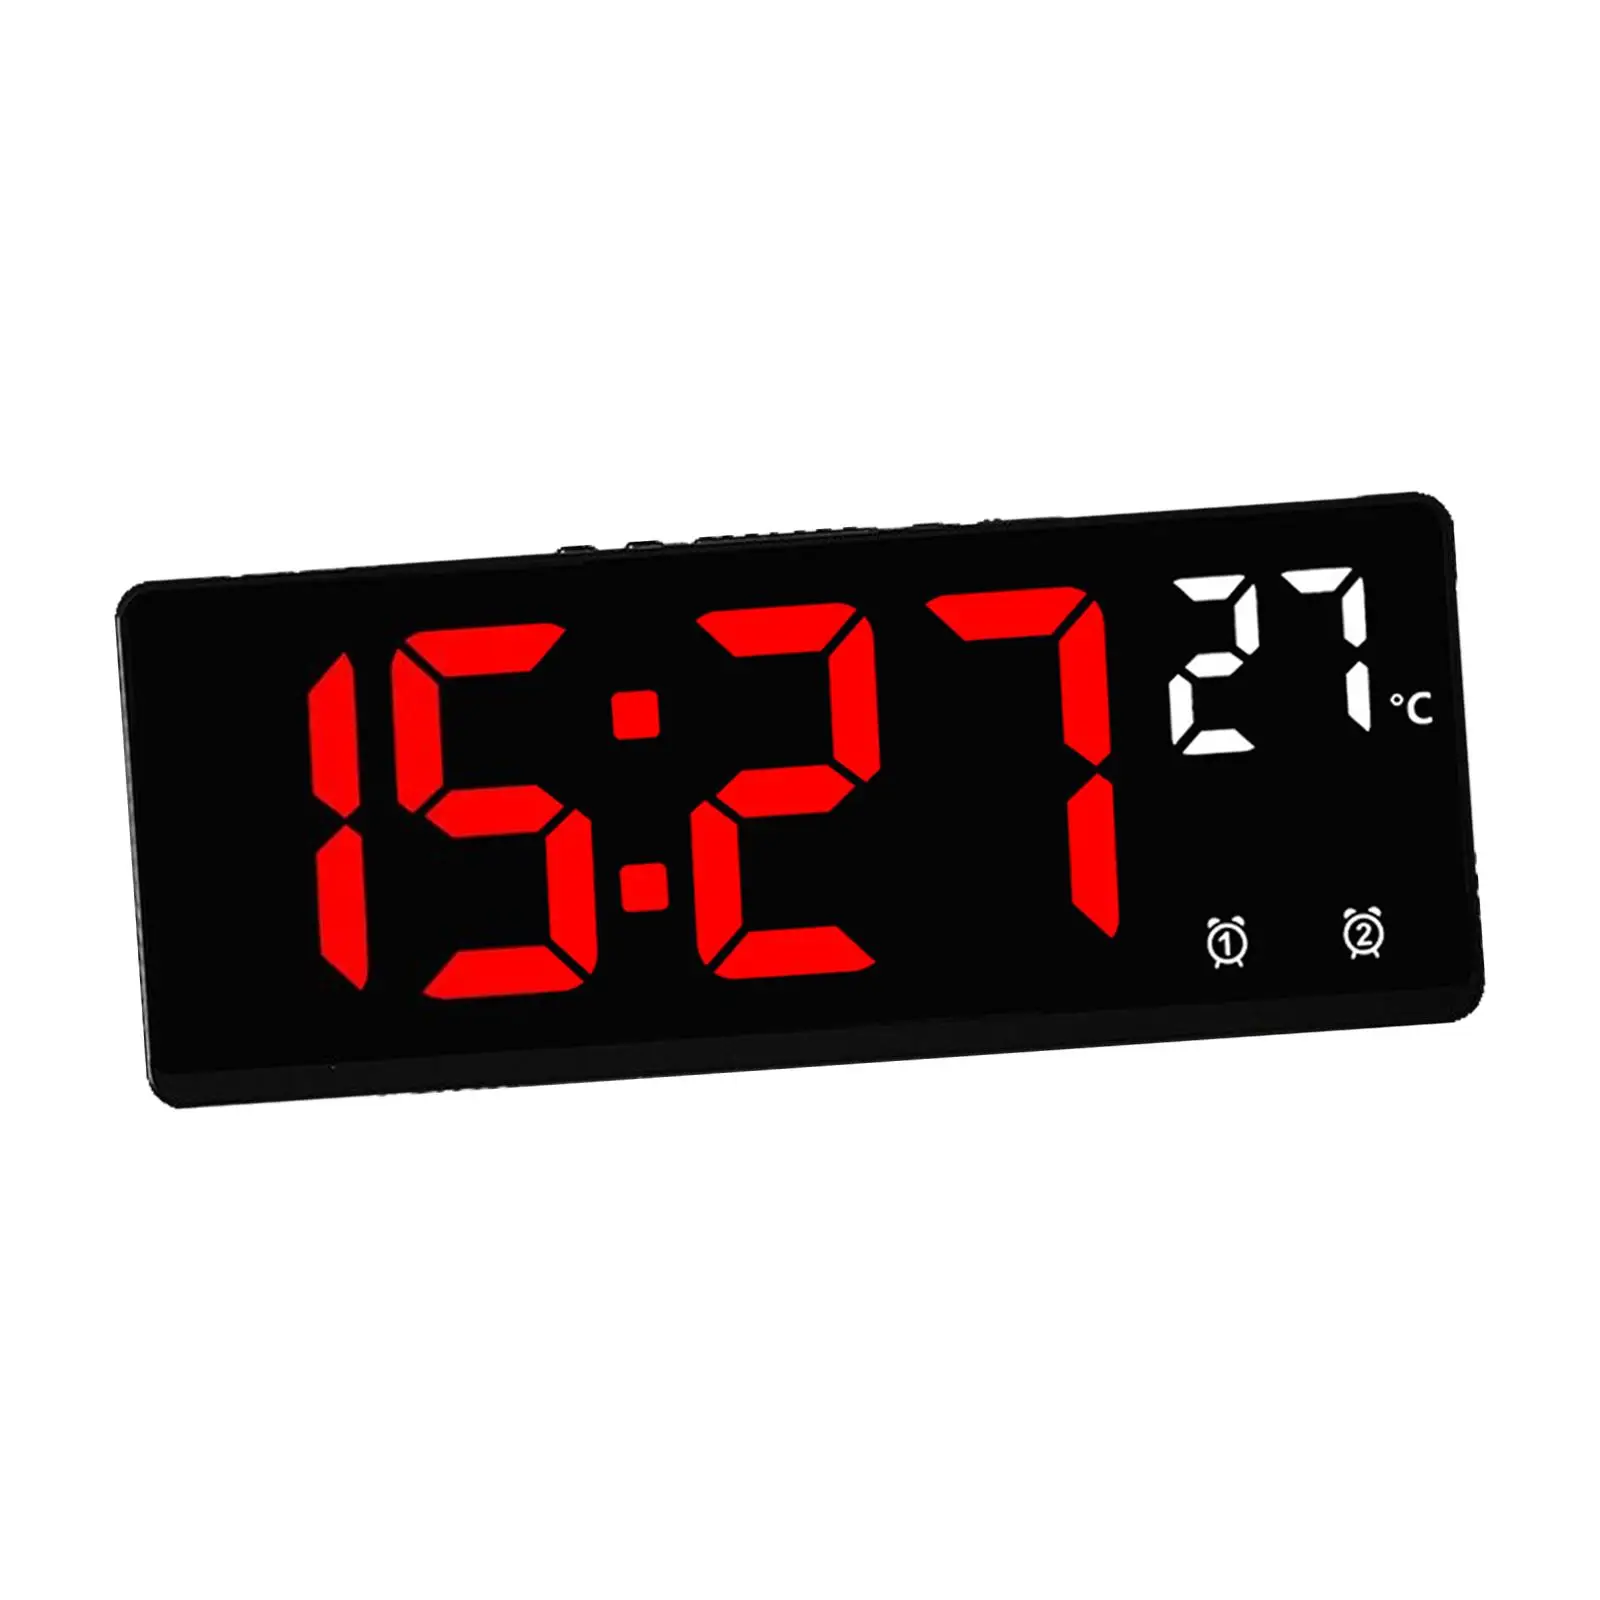 Digital Alarm Clock Simple Dimmable Large Display for Office Bedroom